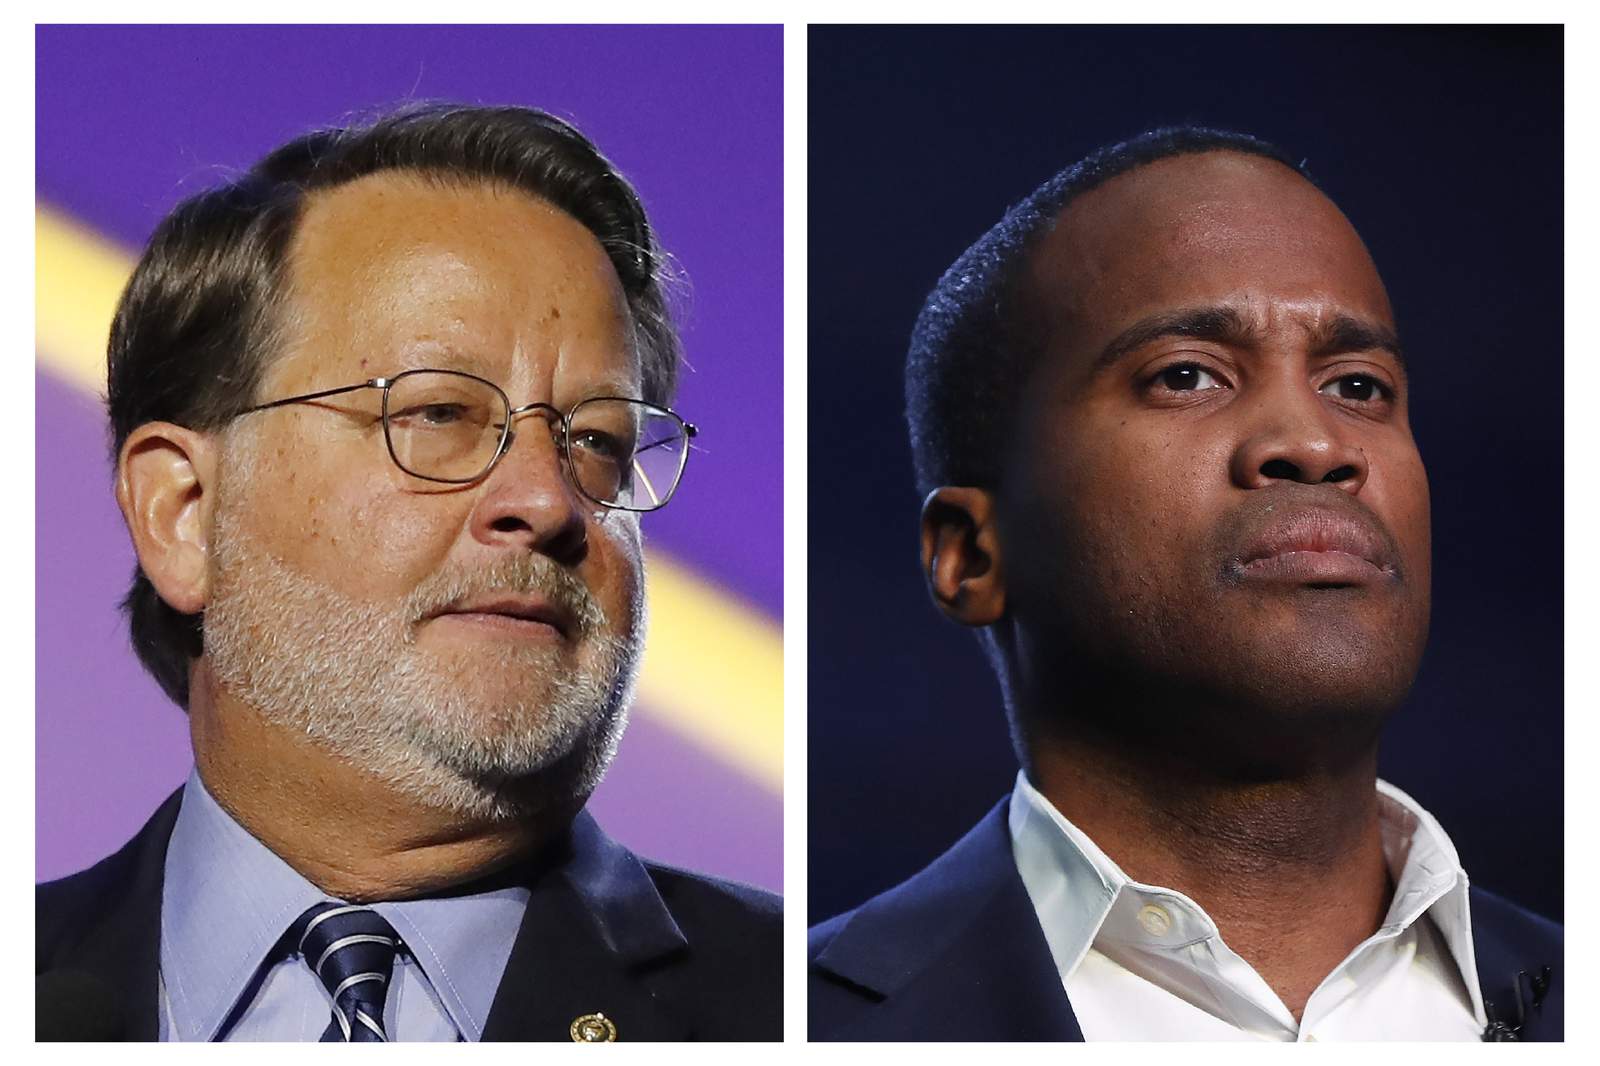 Poll: Peters, James in tight race for Michigan US Senate seat